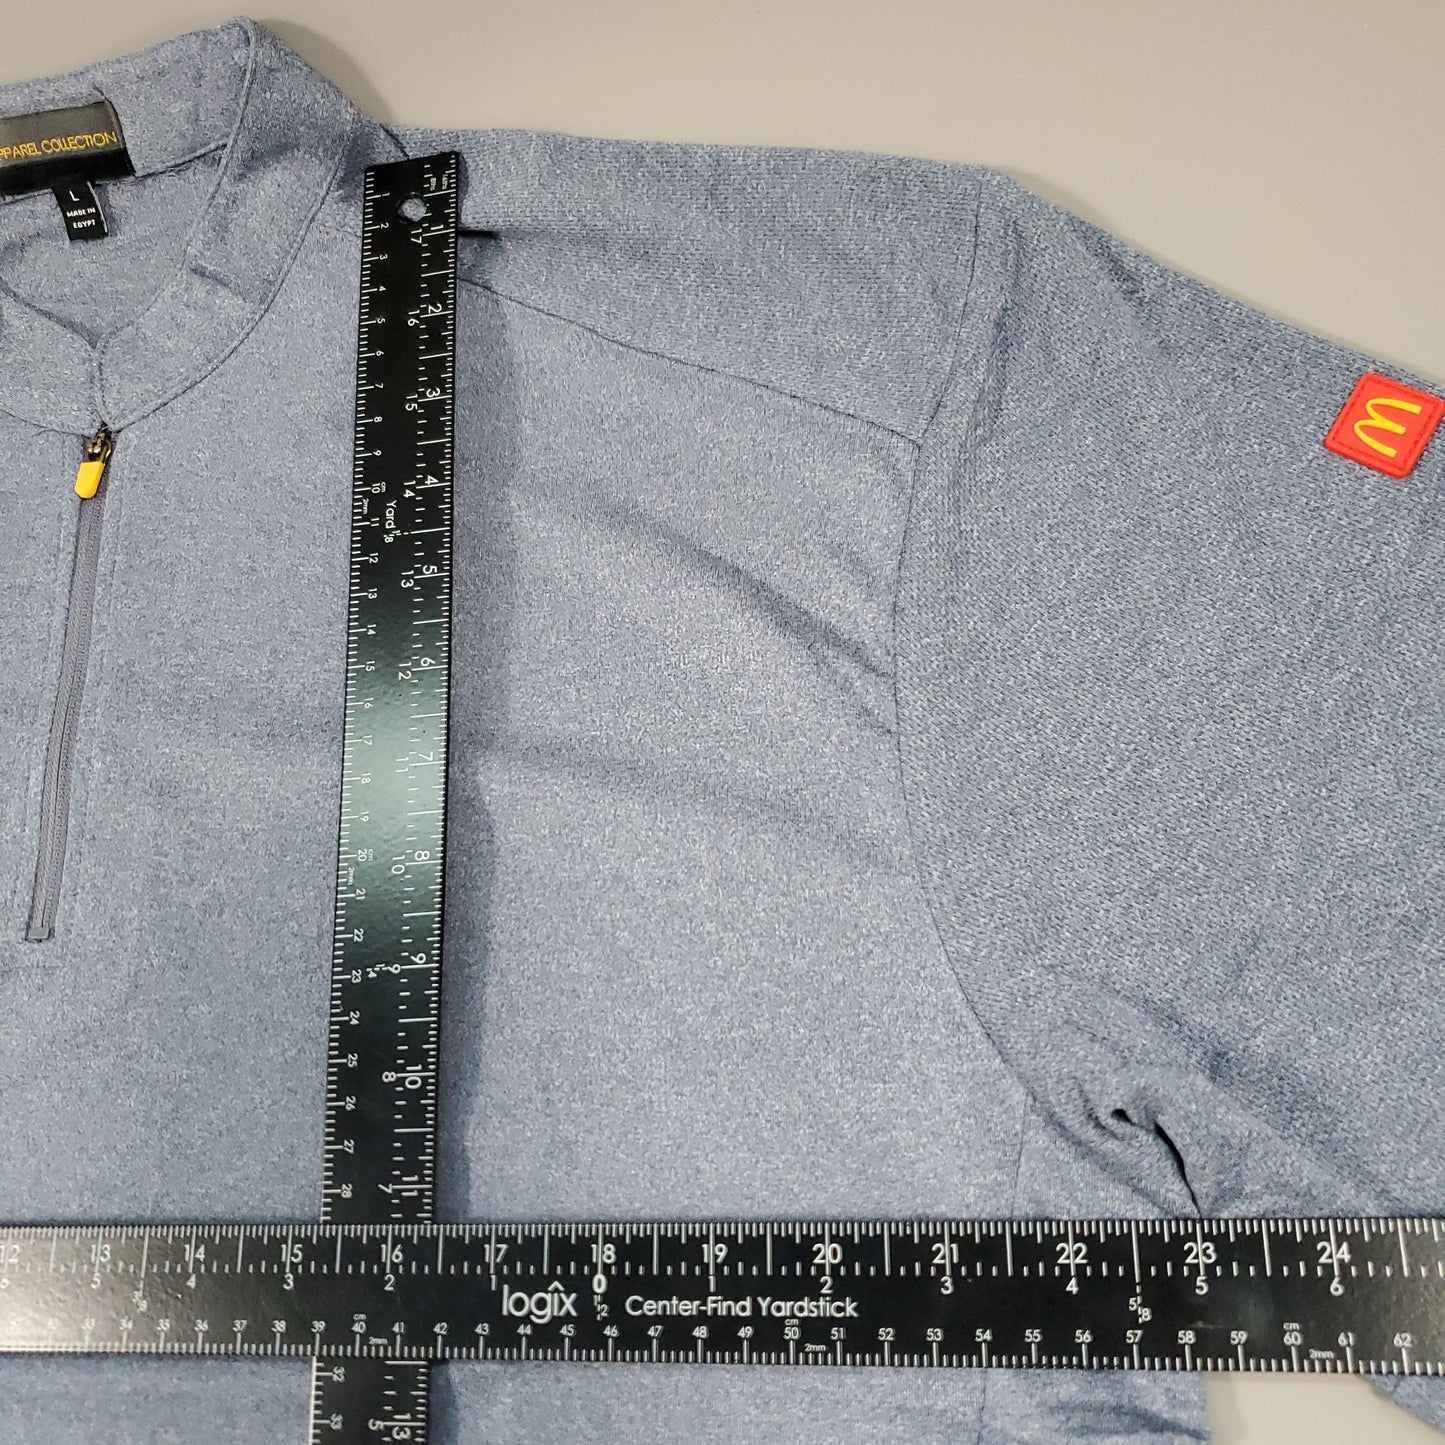 MCDONALD'S by APPAREL COLLECTION Crew Zip Polo Shirt Men's Sz L Heather Gray (New Other)